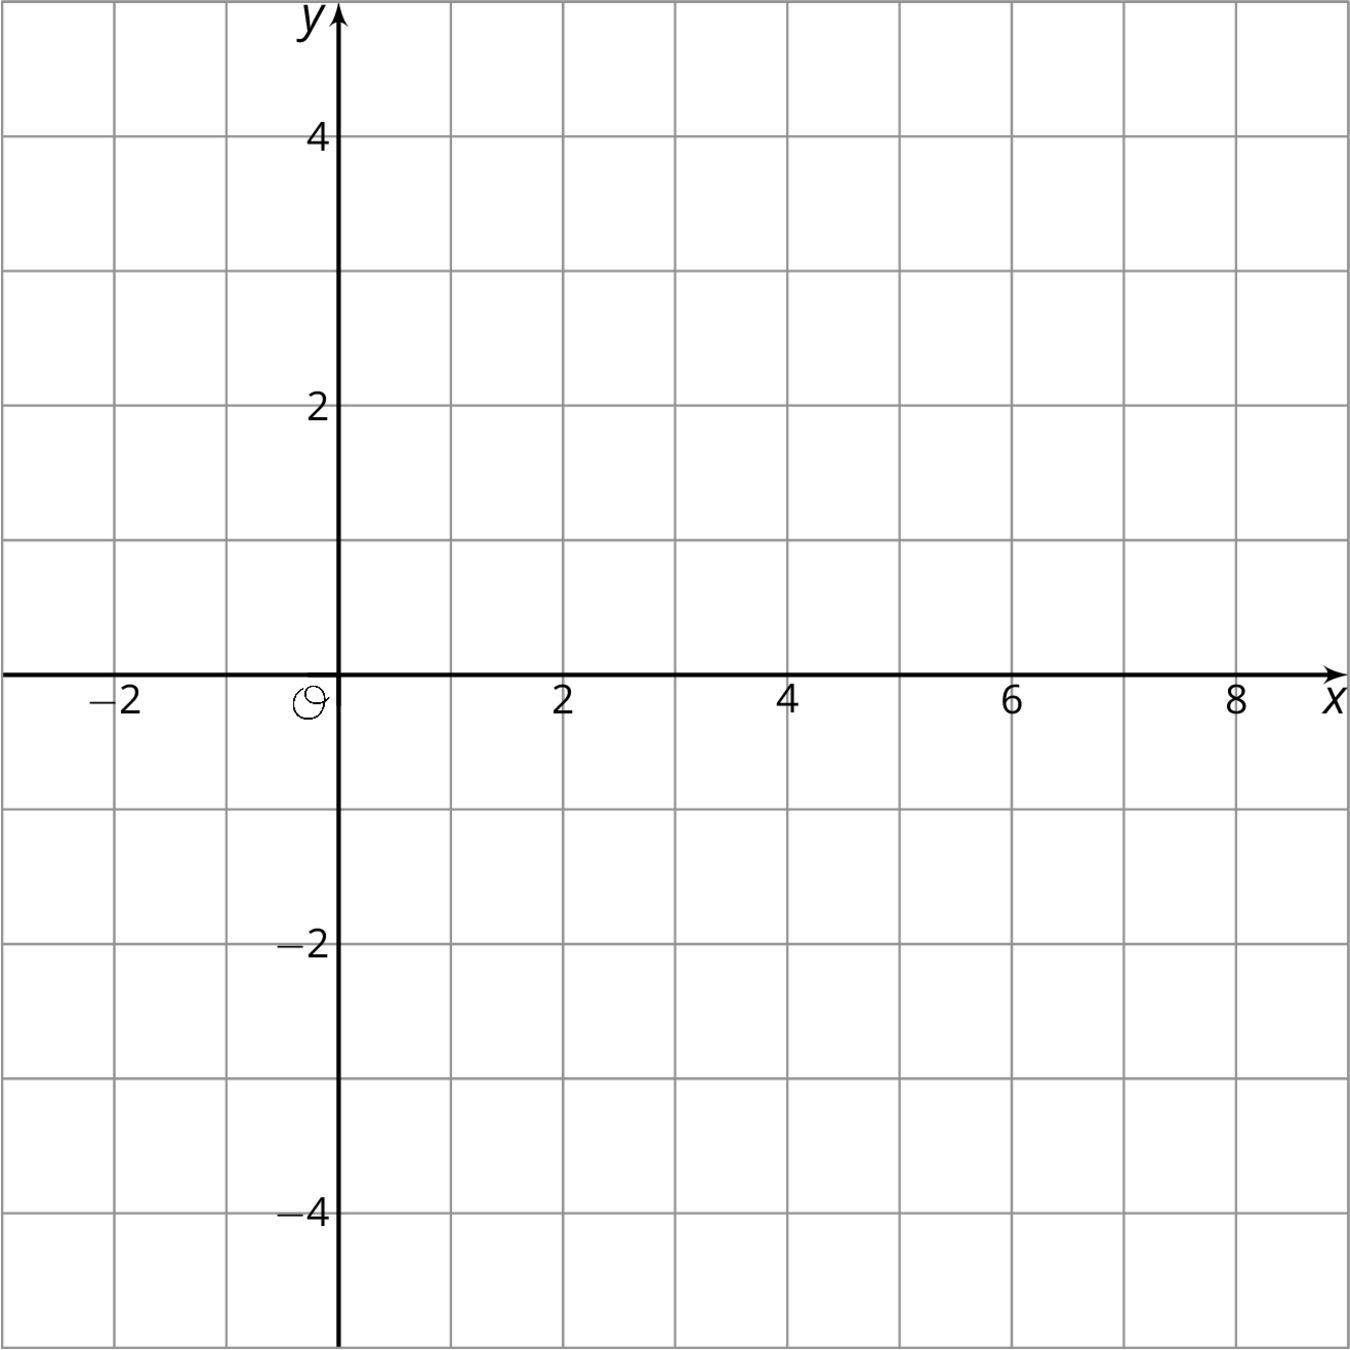 A blank coordinate plane with the origin labeled “O.” The x axis has the numbers negative 2 through 8, in increments of 2, indicated. There are also vertical gridlines midway between each indicated number. The y-axis has the numbers negative 4 through 4 indicated, in increments of 2, indicated. There are also horizontal gridlines indicated midway between each indicated number.